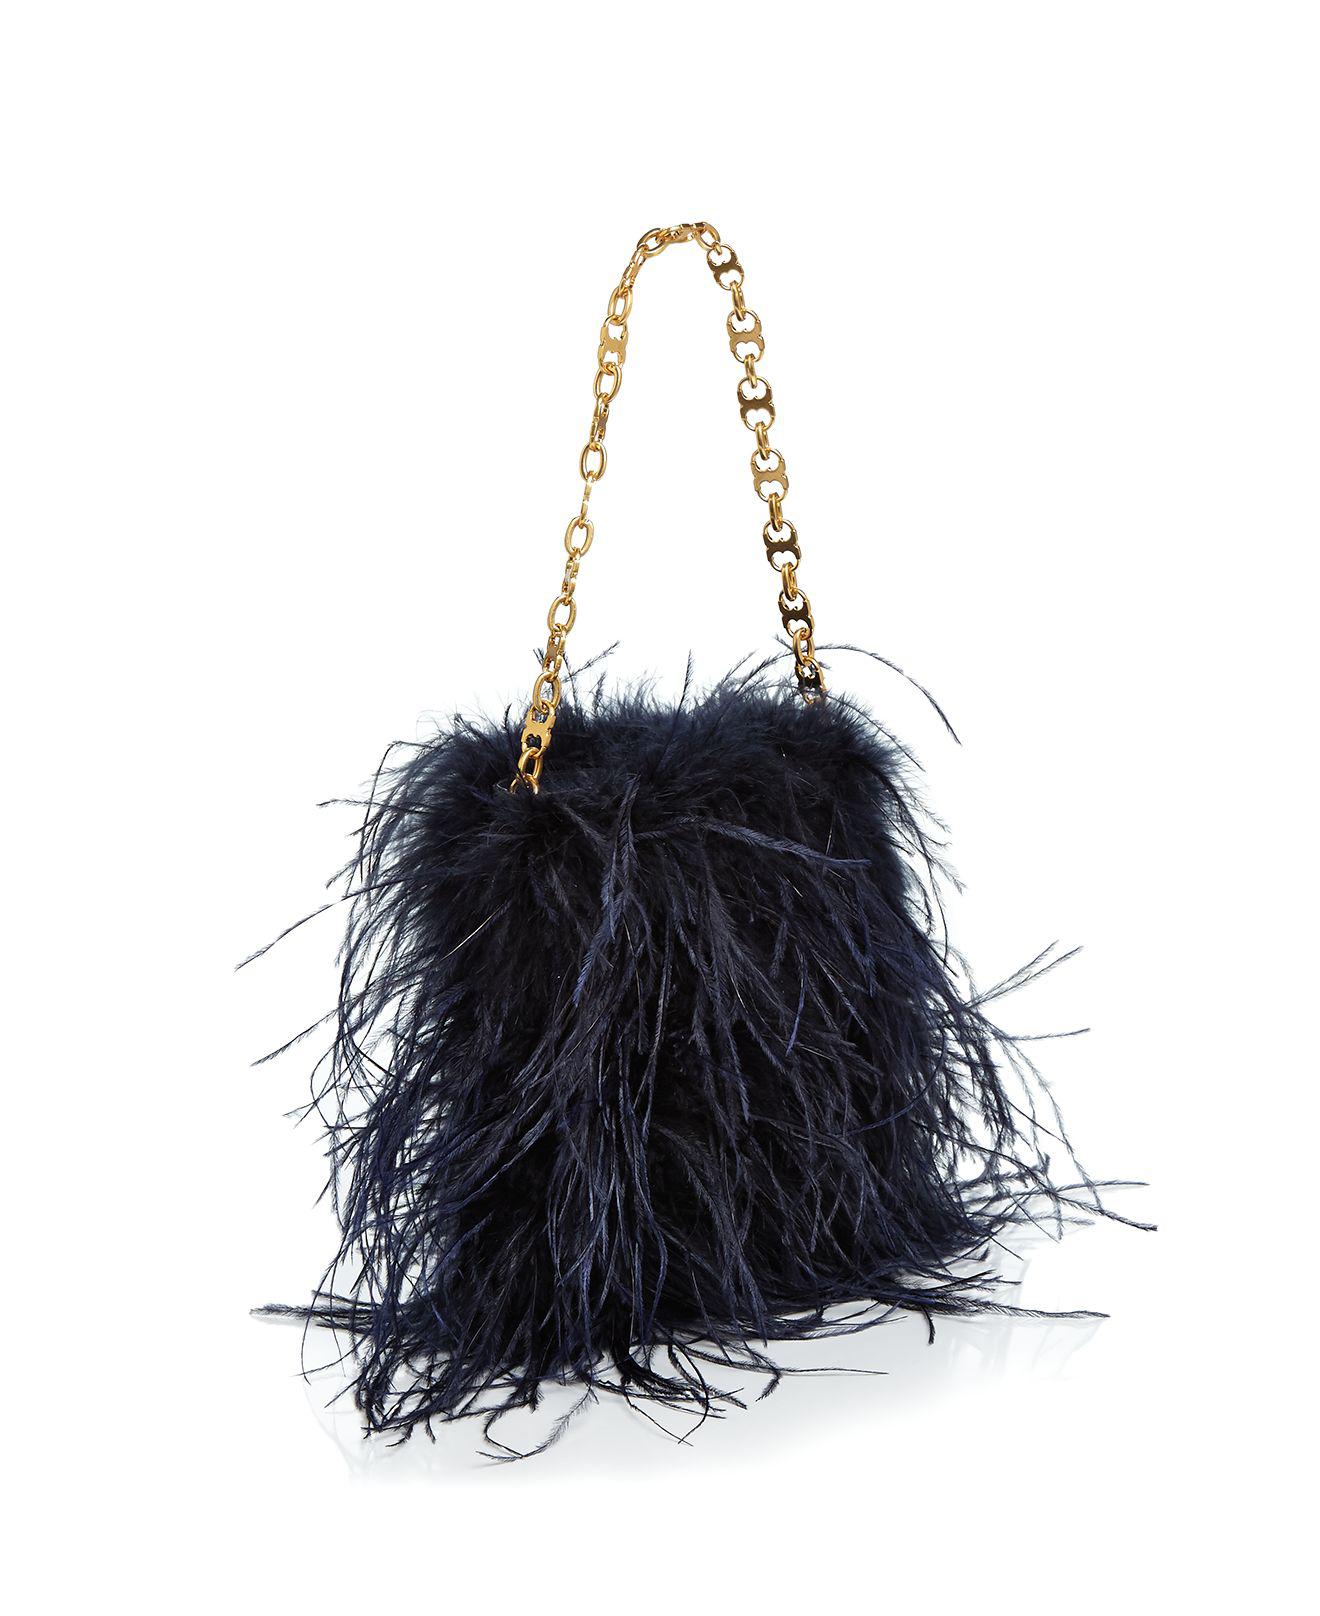 Tory Burch Ostrich Feather Mini Bag in Navy/Gold (Blue) - Lyst